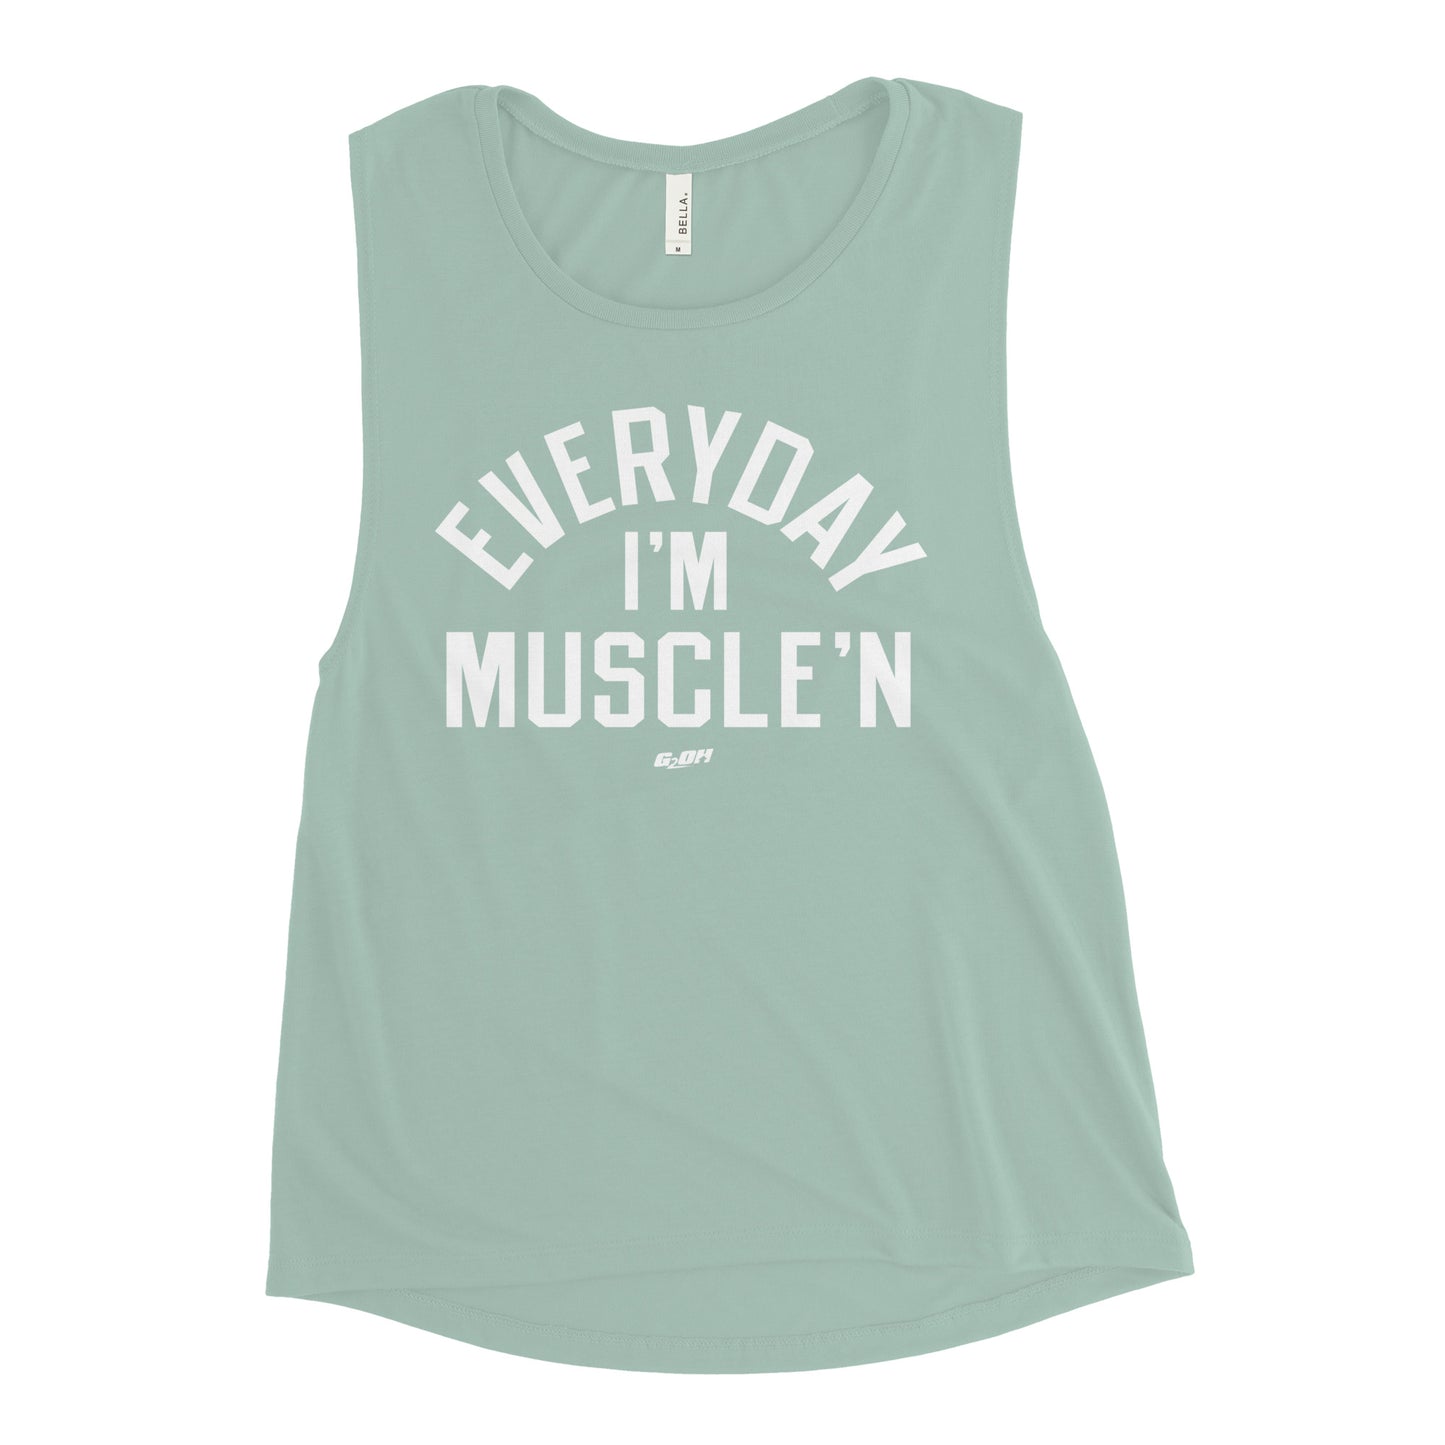 Everyday I'm Muscle'n Women's Muscle Tank